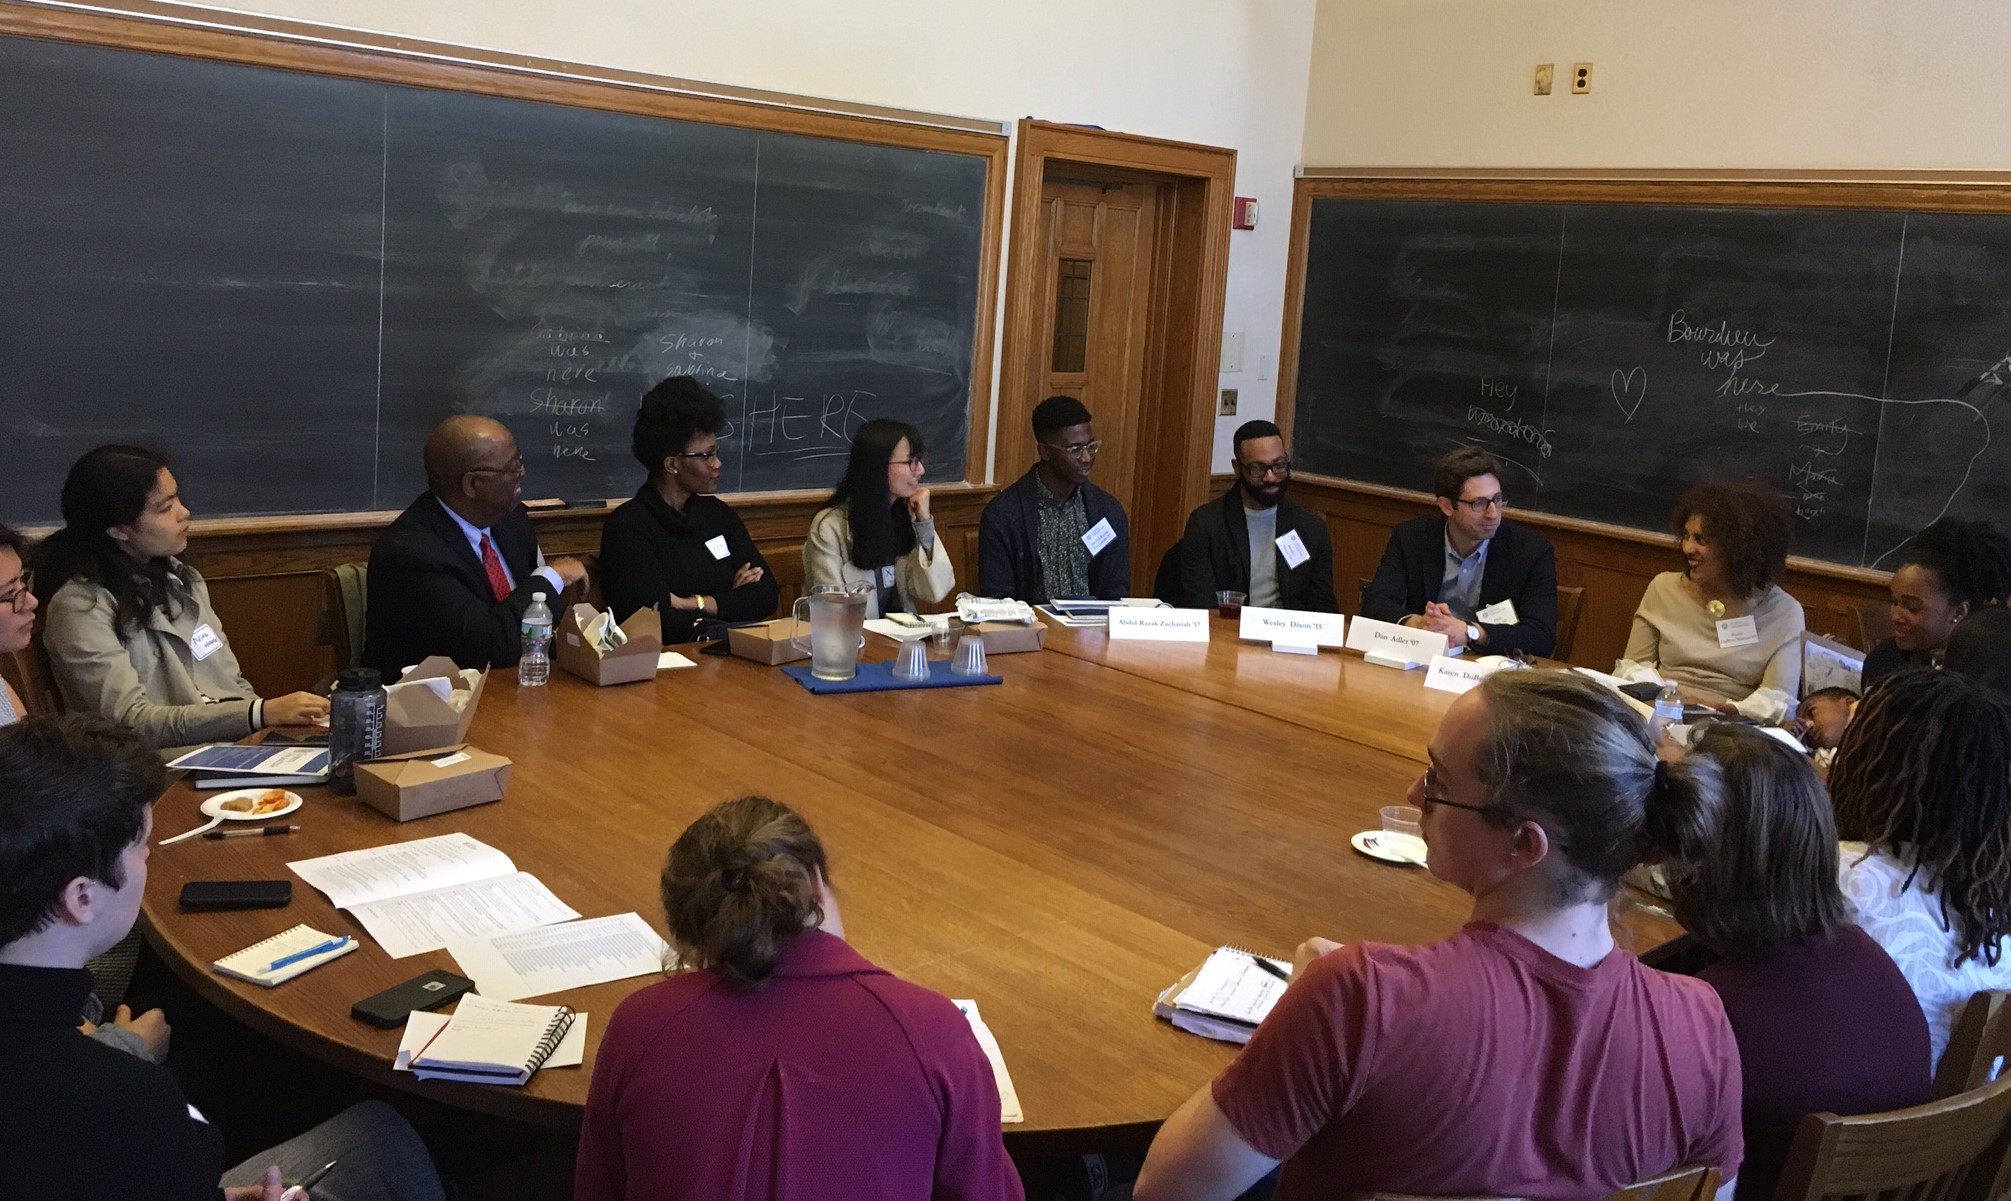 Alumni and students hold a roundtable discussion during the Careers, Life, and Yale "Changemakers" event.